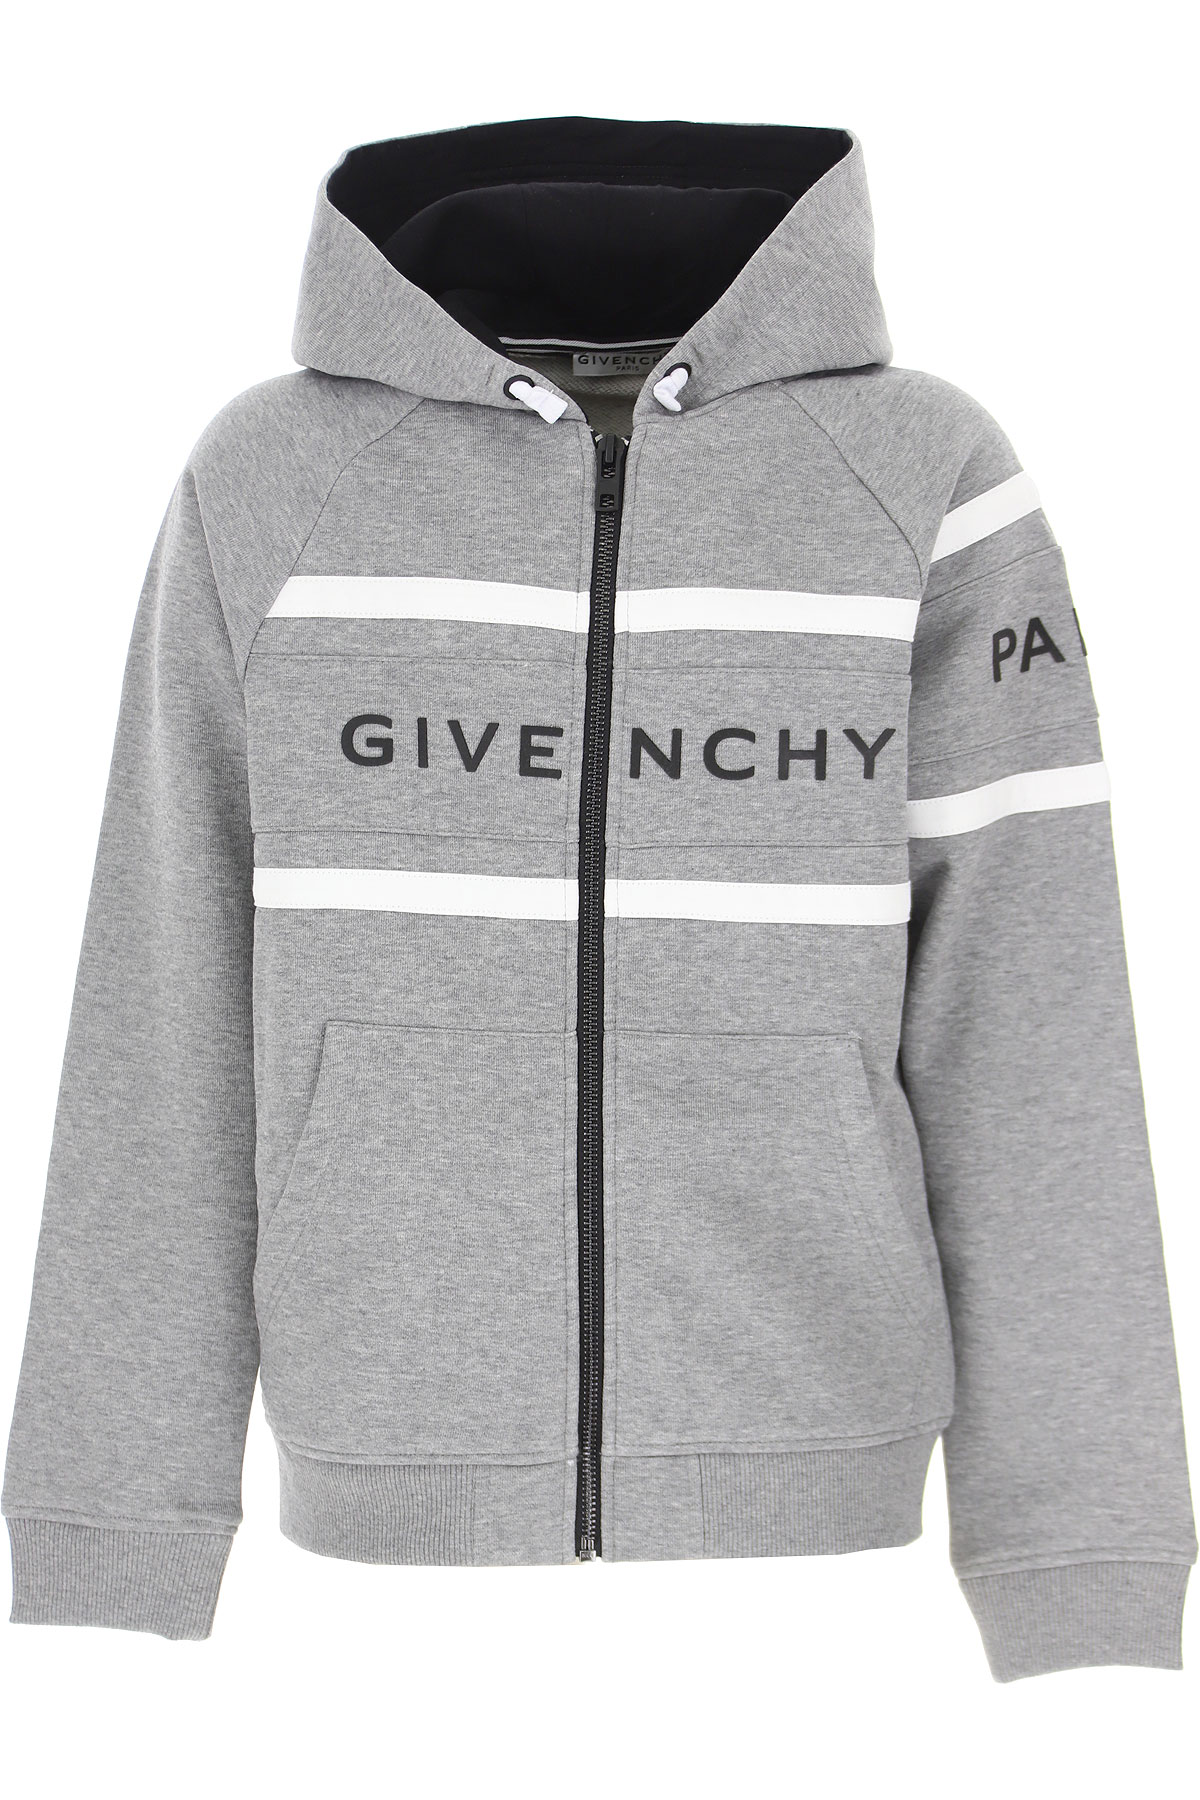 Kidswear Givenchy, Style code: h25-195-a47